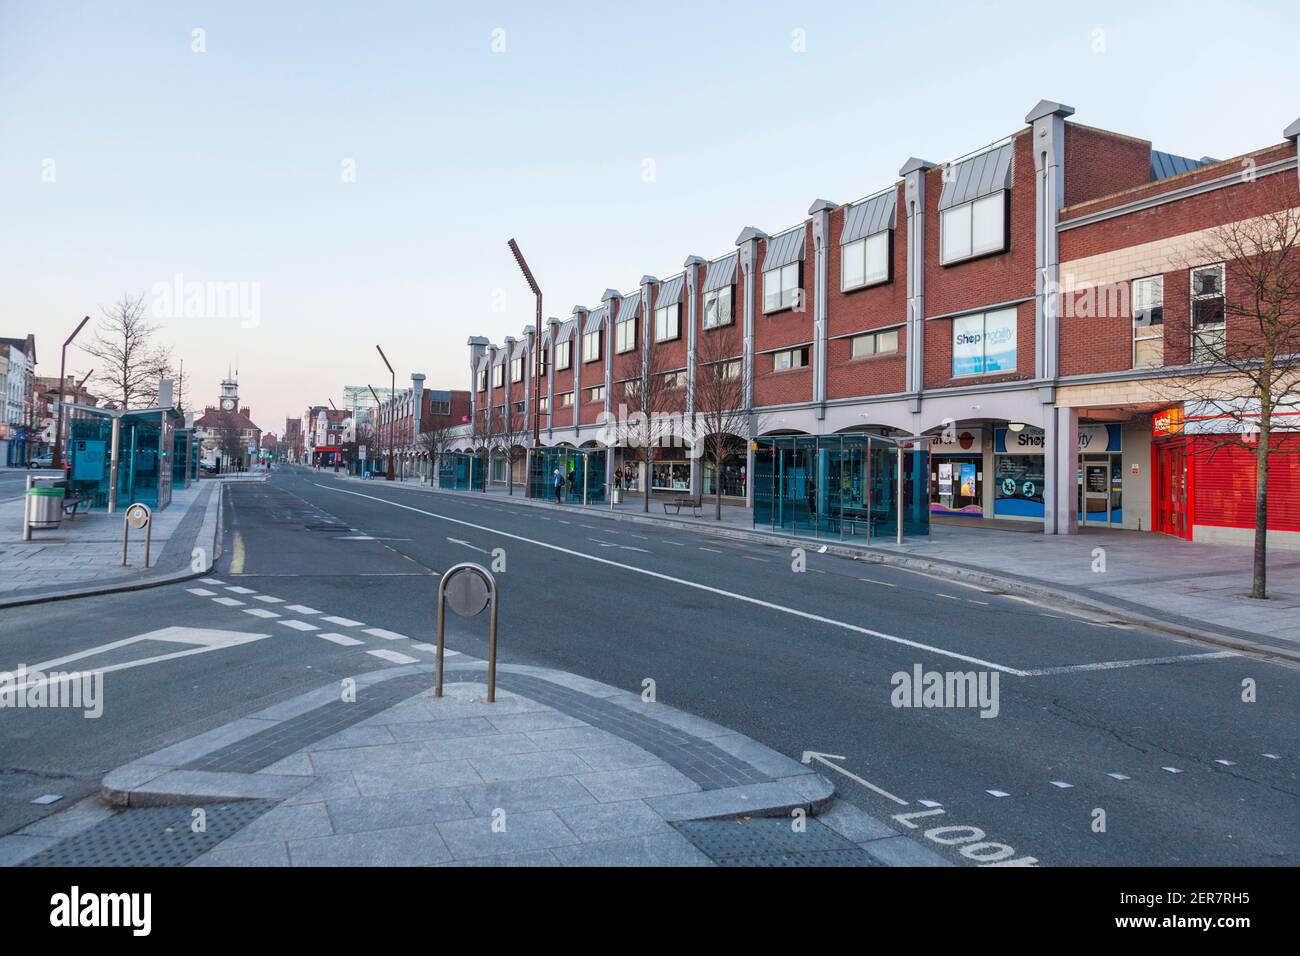 Stockton on Tees,UK. 28th February 2021. Stockton Council are planning on knocking down half their High Street , including the Castlegate Centre and replacing it with a Riverside park to open up the riverside area for leisure and recreation. David Dixon/Alamy Stock Photo